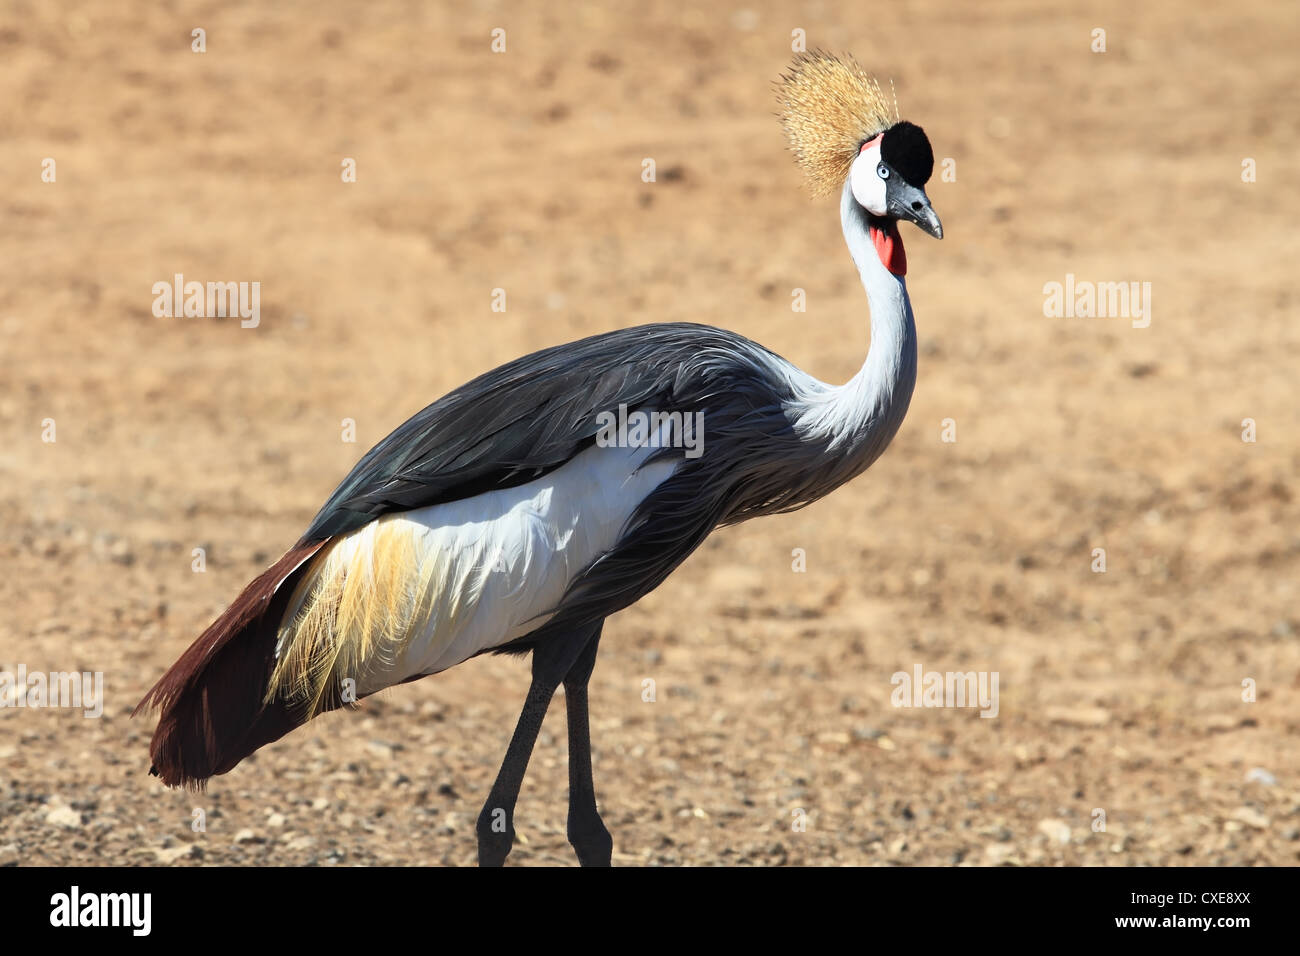 The bird with magnificent plumage Stock Photo